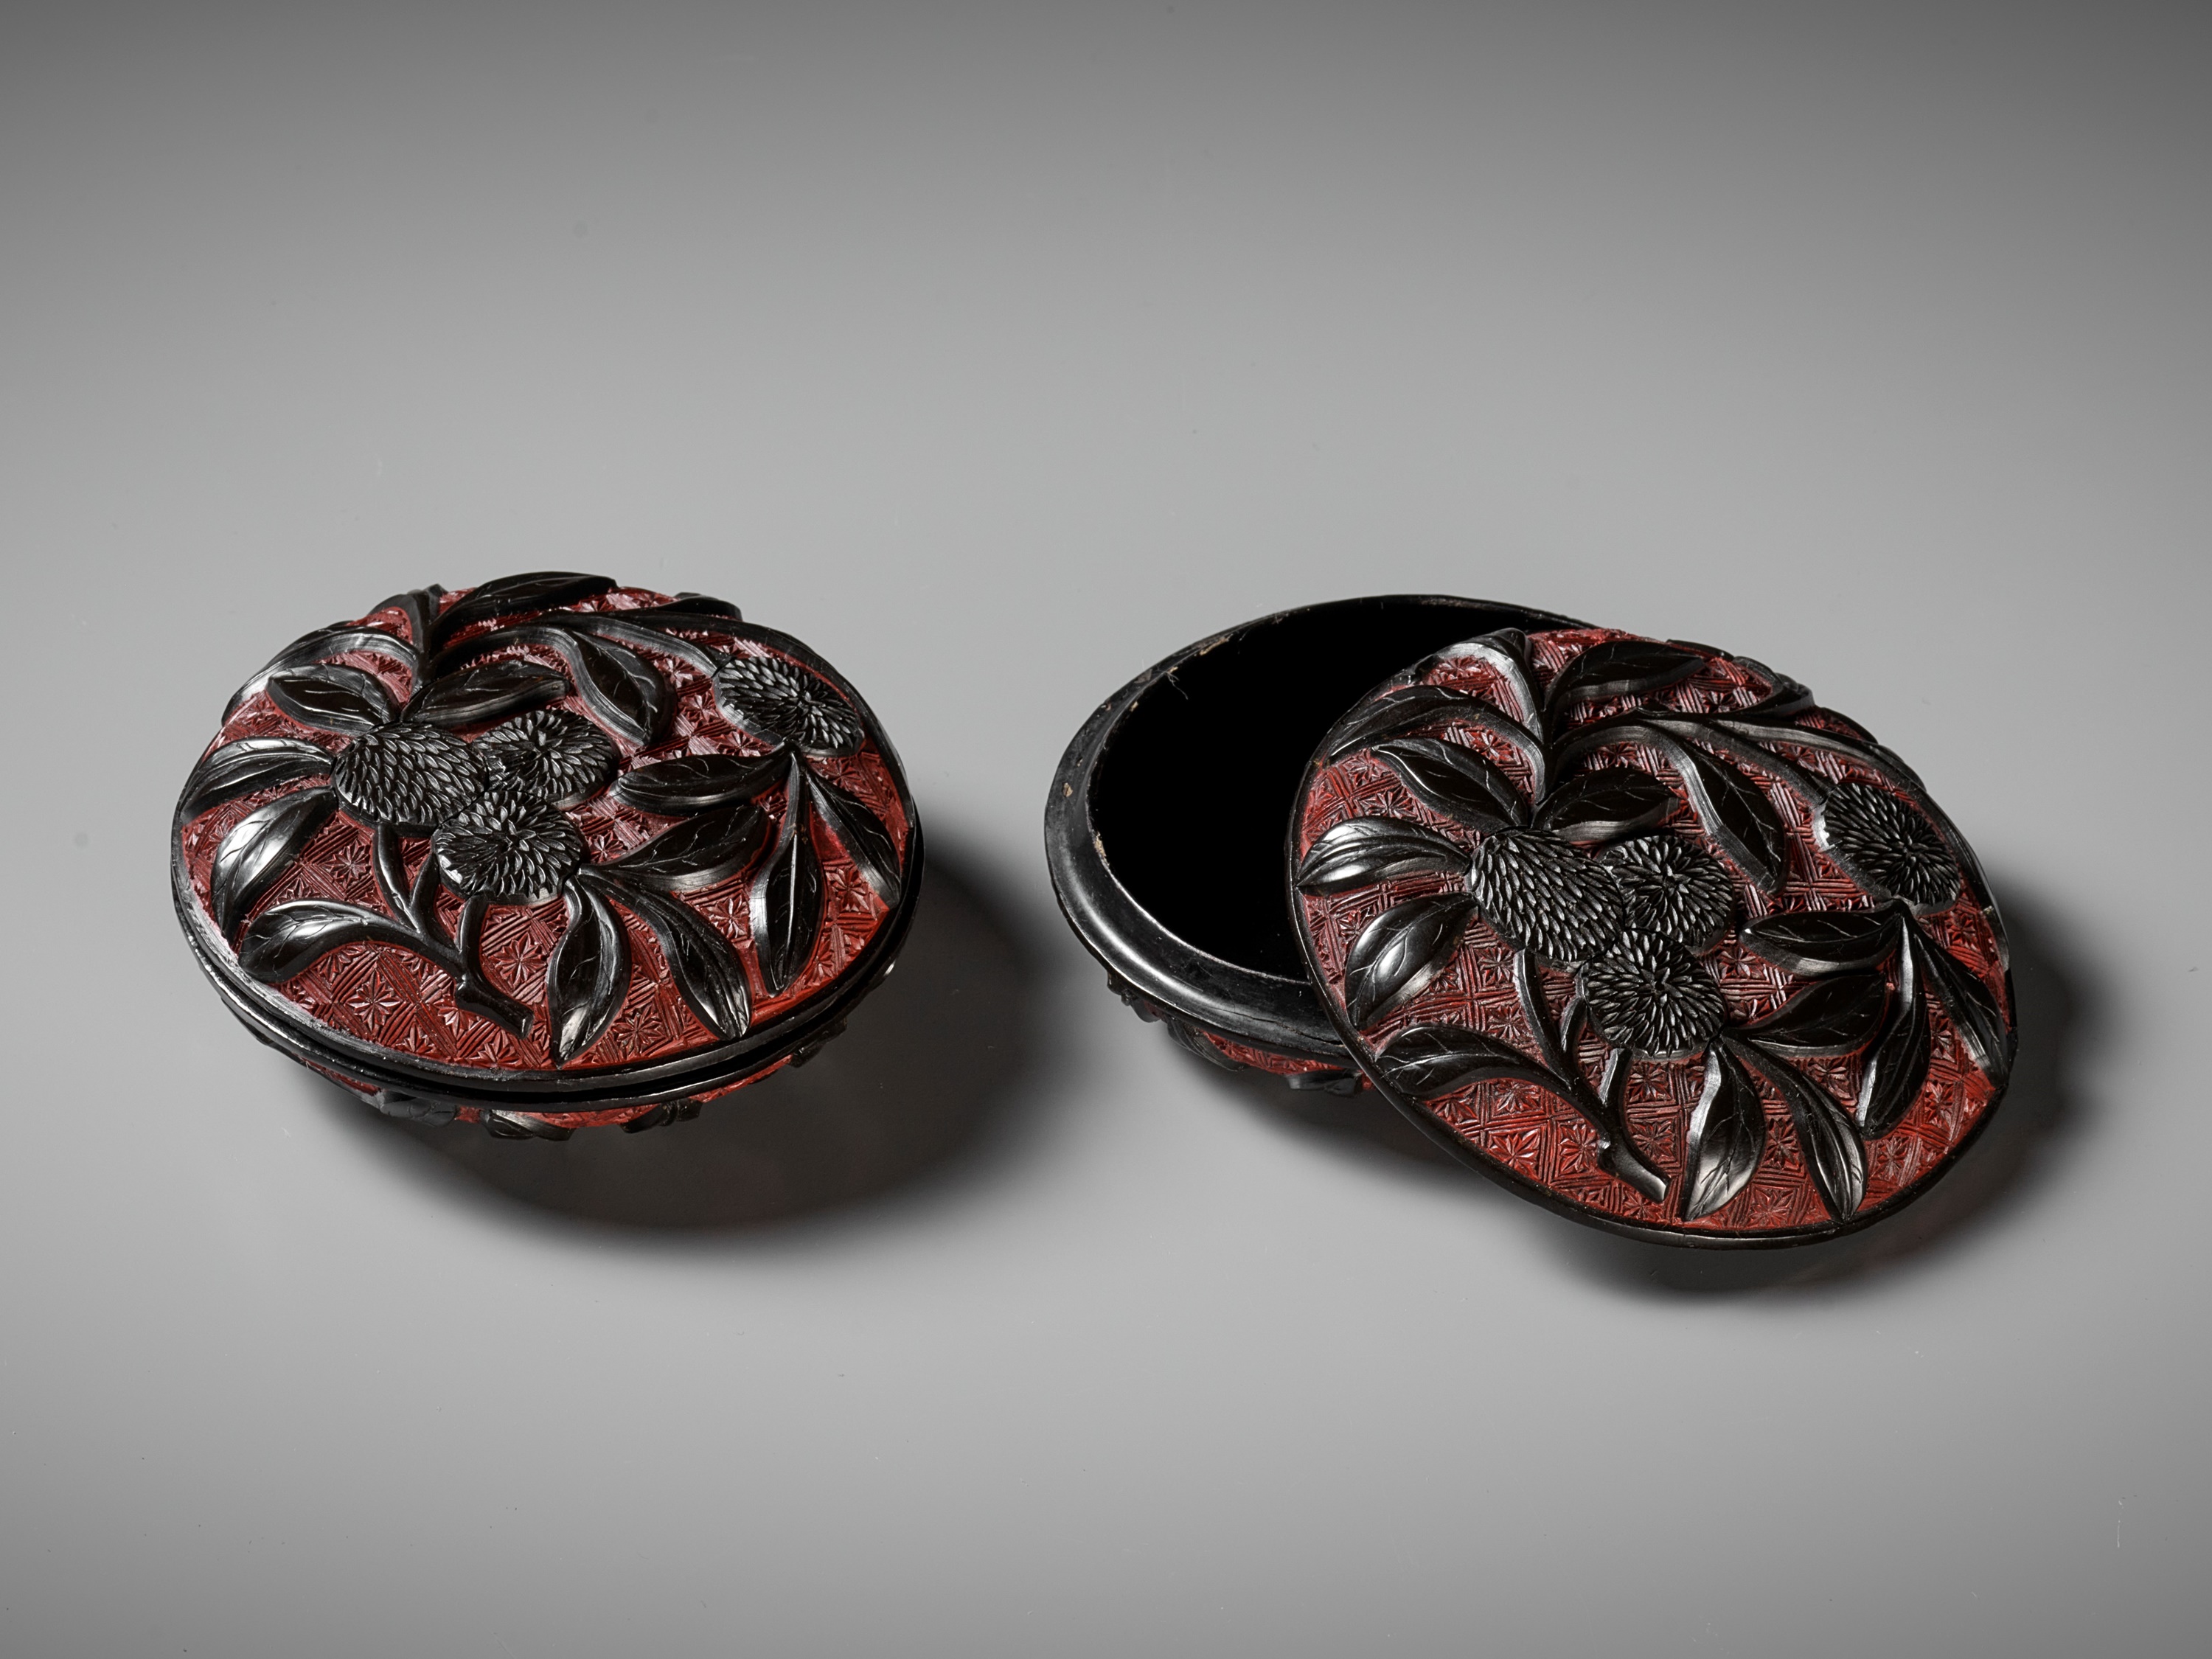 A PAIR OF RED AND BLACK LACQUER 'LYCHEE' BOXES AND COVERS, MING DYNASTY